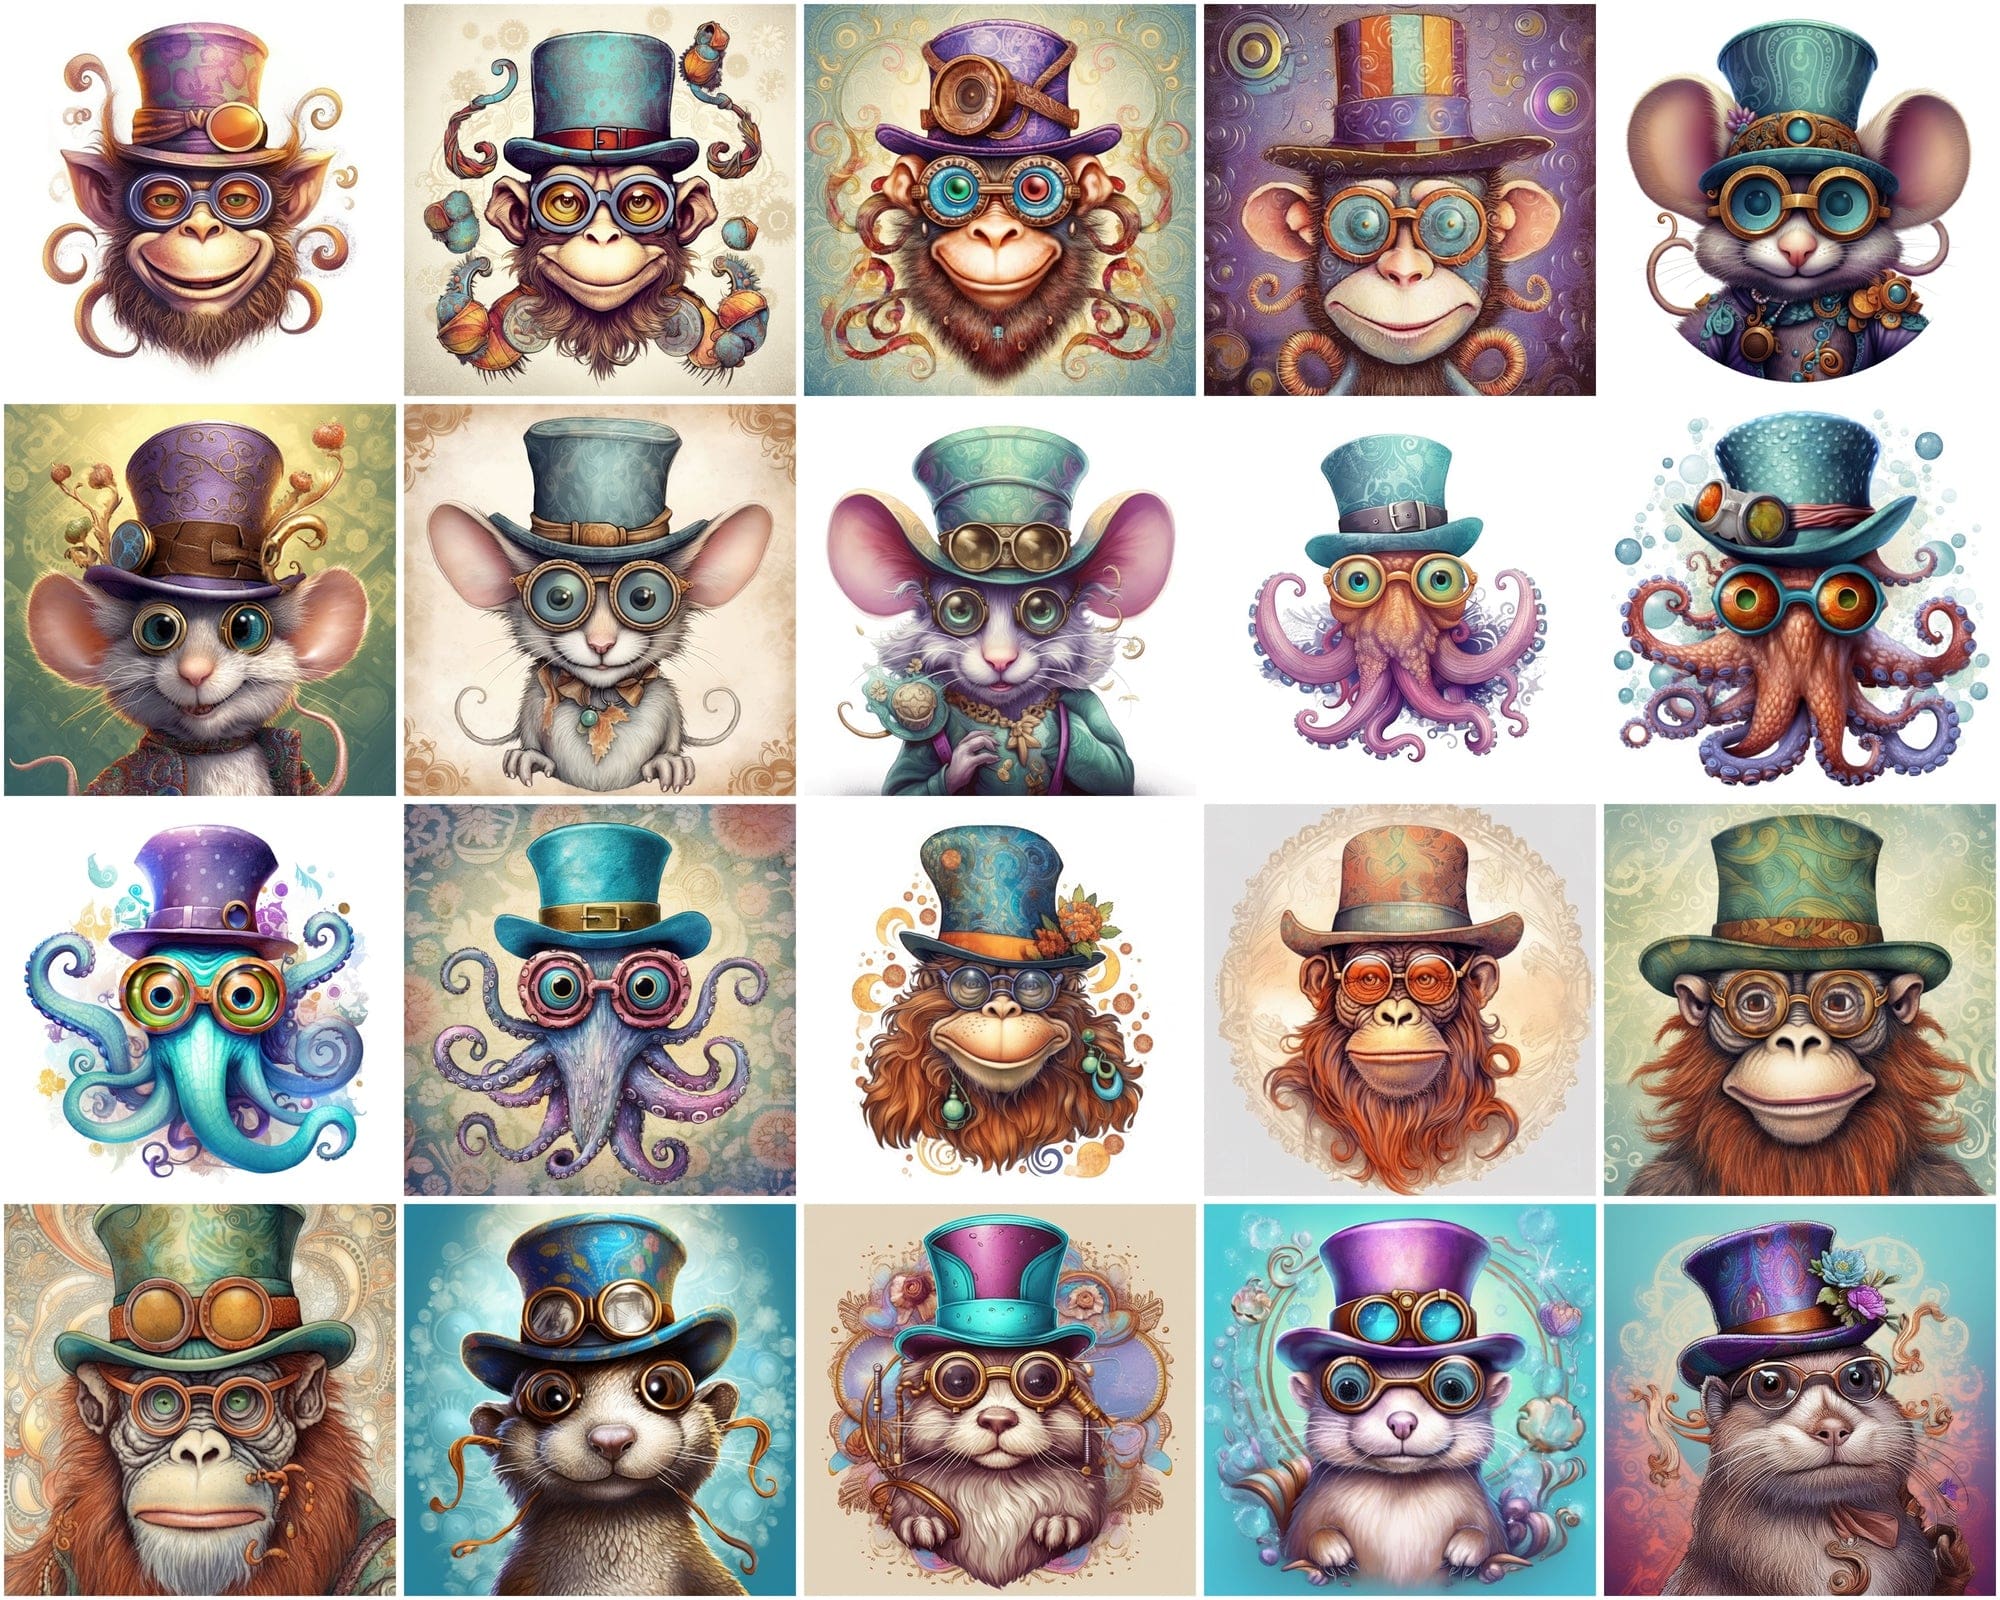 190 Whimsical, Magical, Wacky Animal Images | Commercial License | Colorful PNGs with Glasses Digital Download Sumobundle